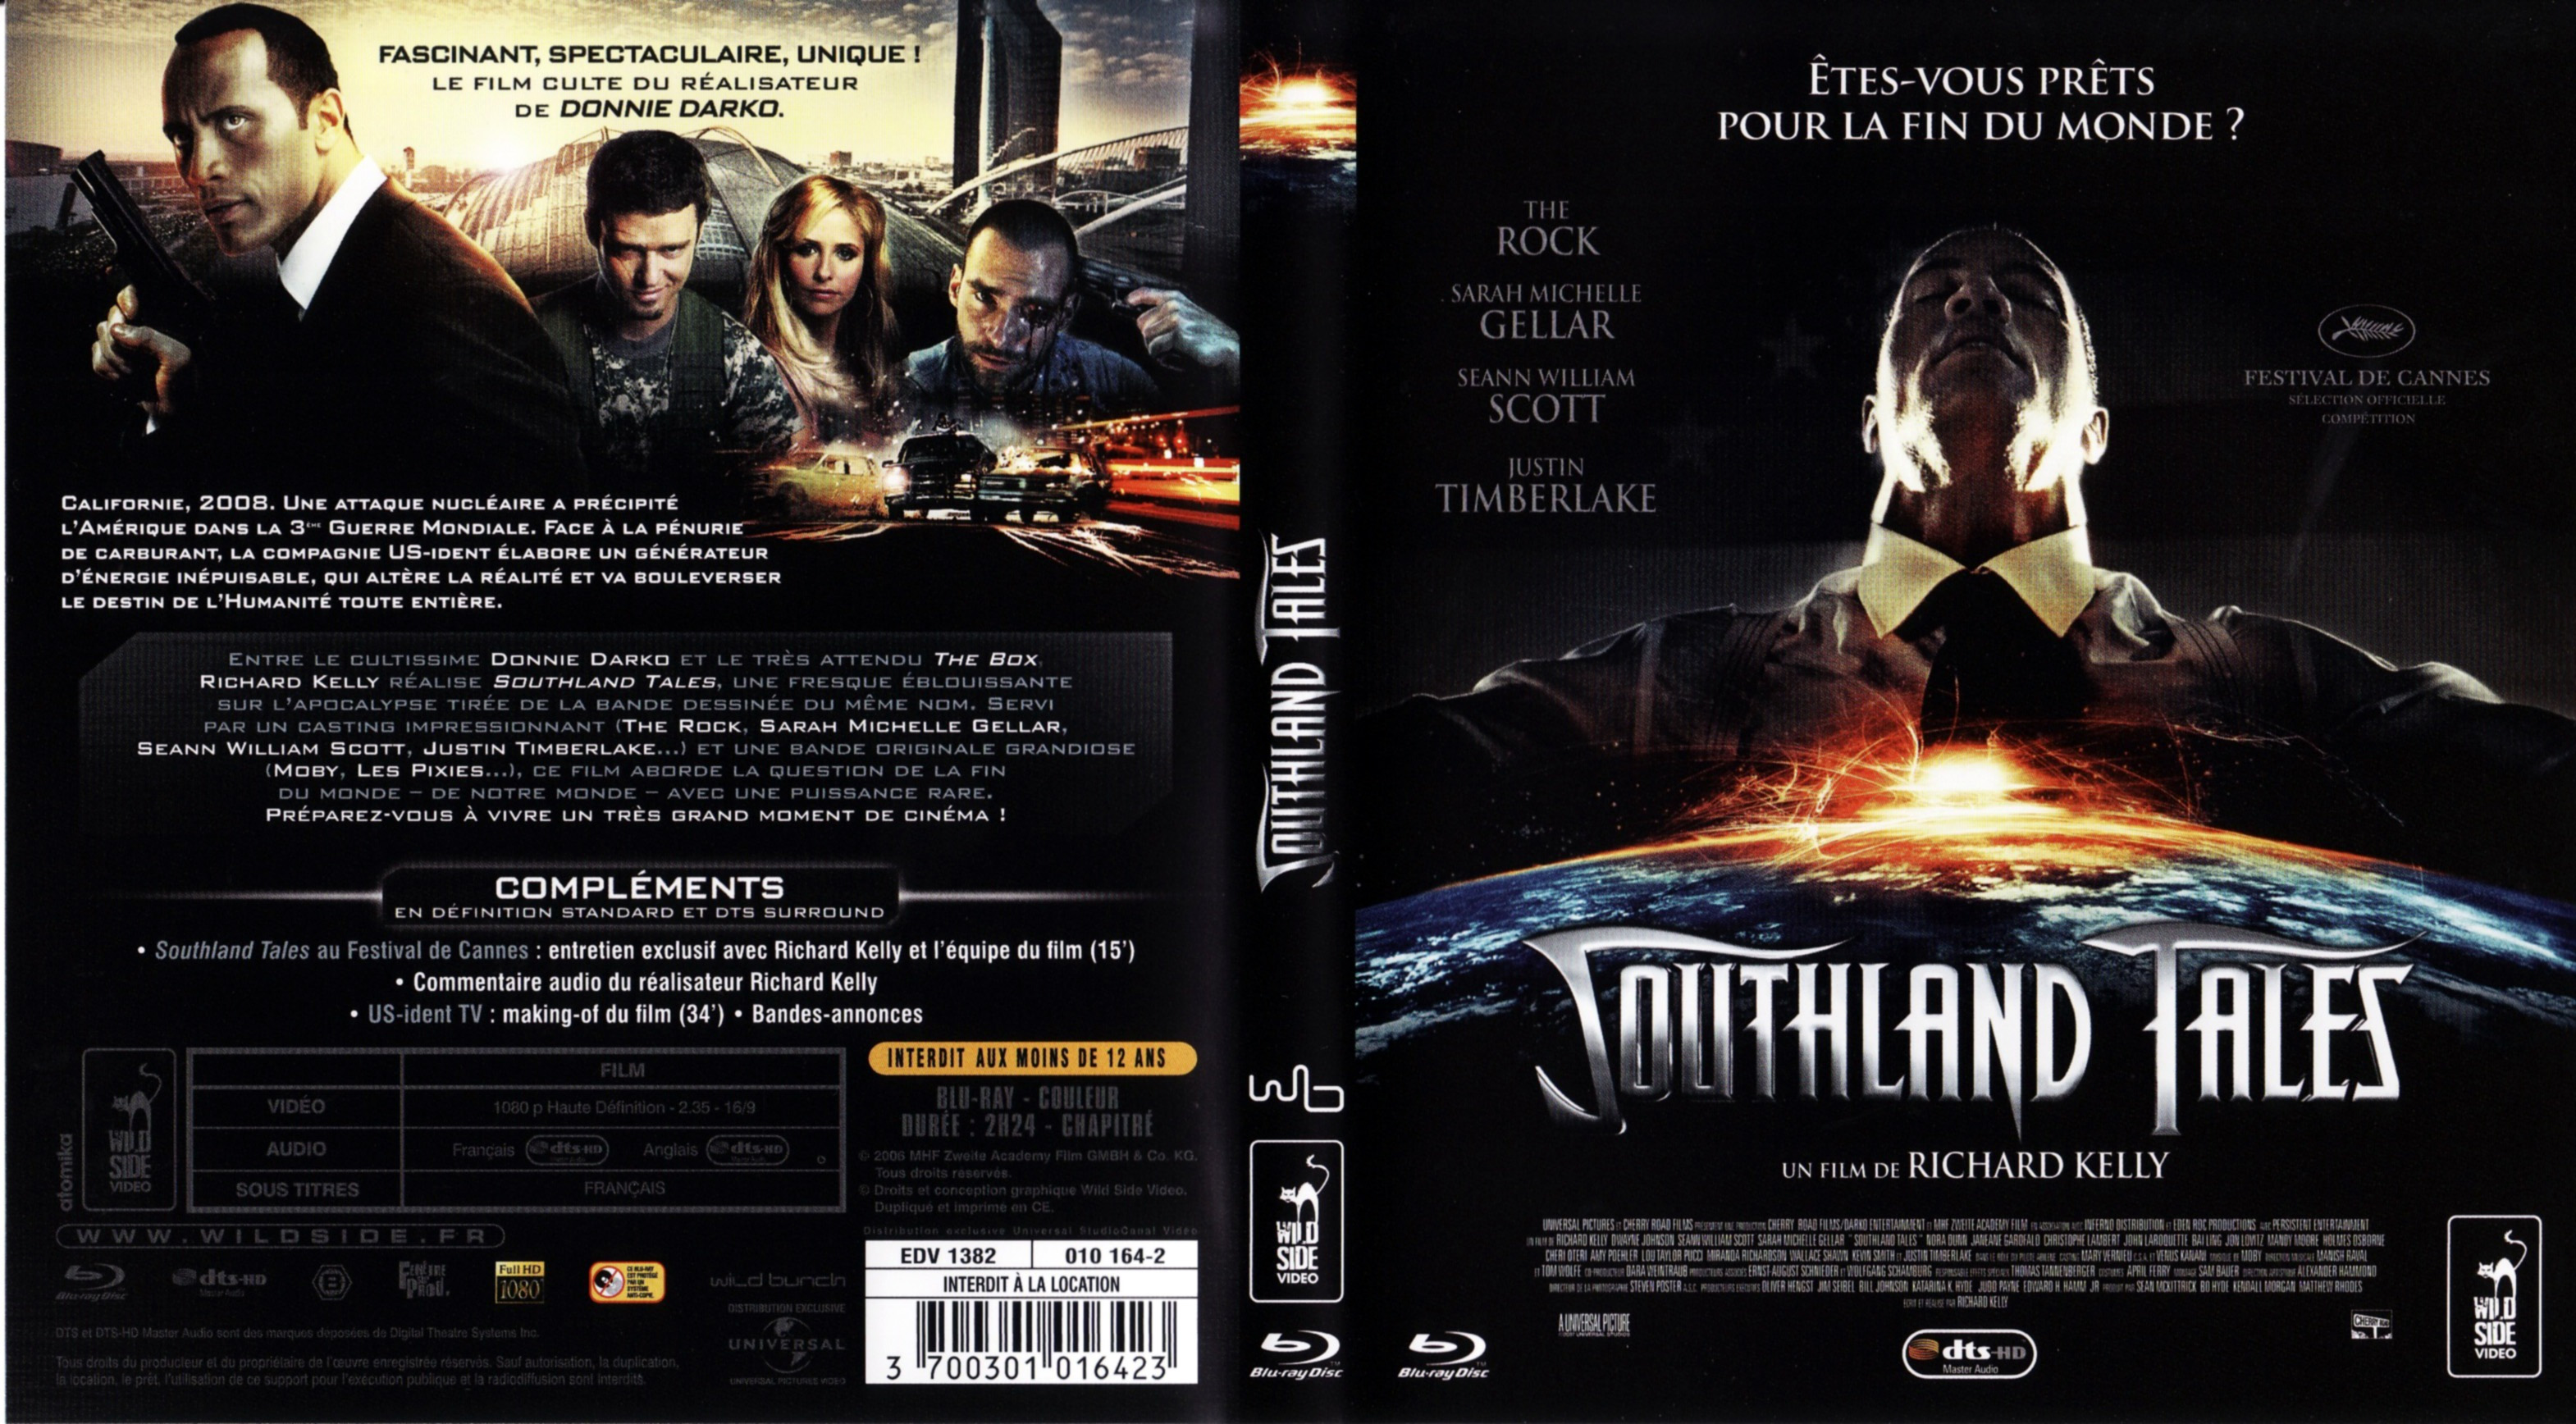 Jaquette DVD Southland tales (BLU-RAY)